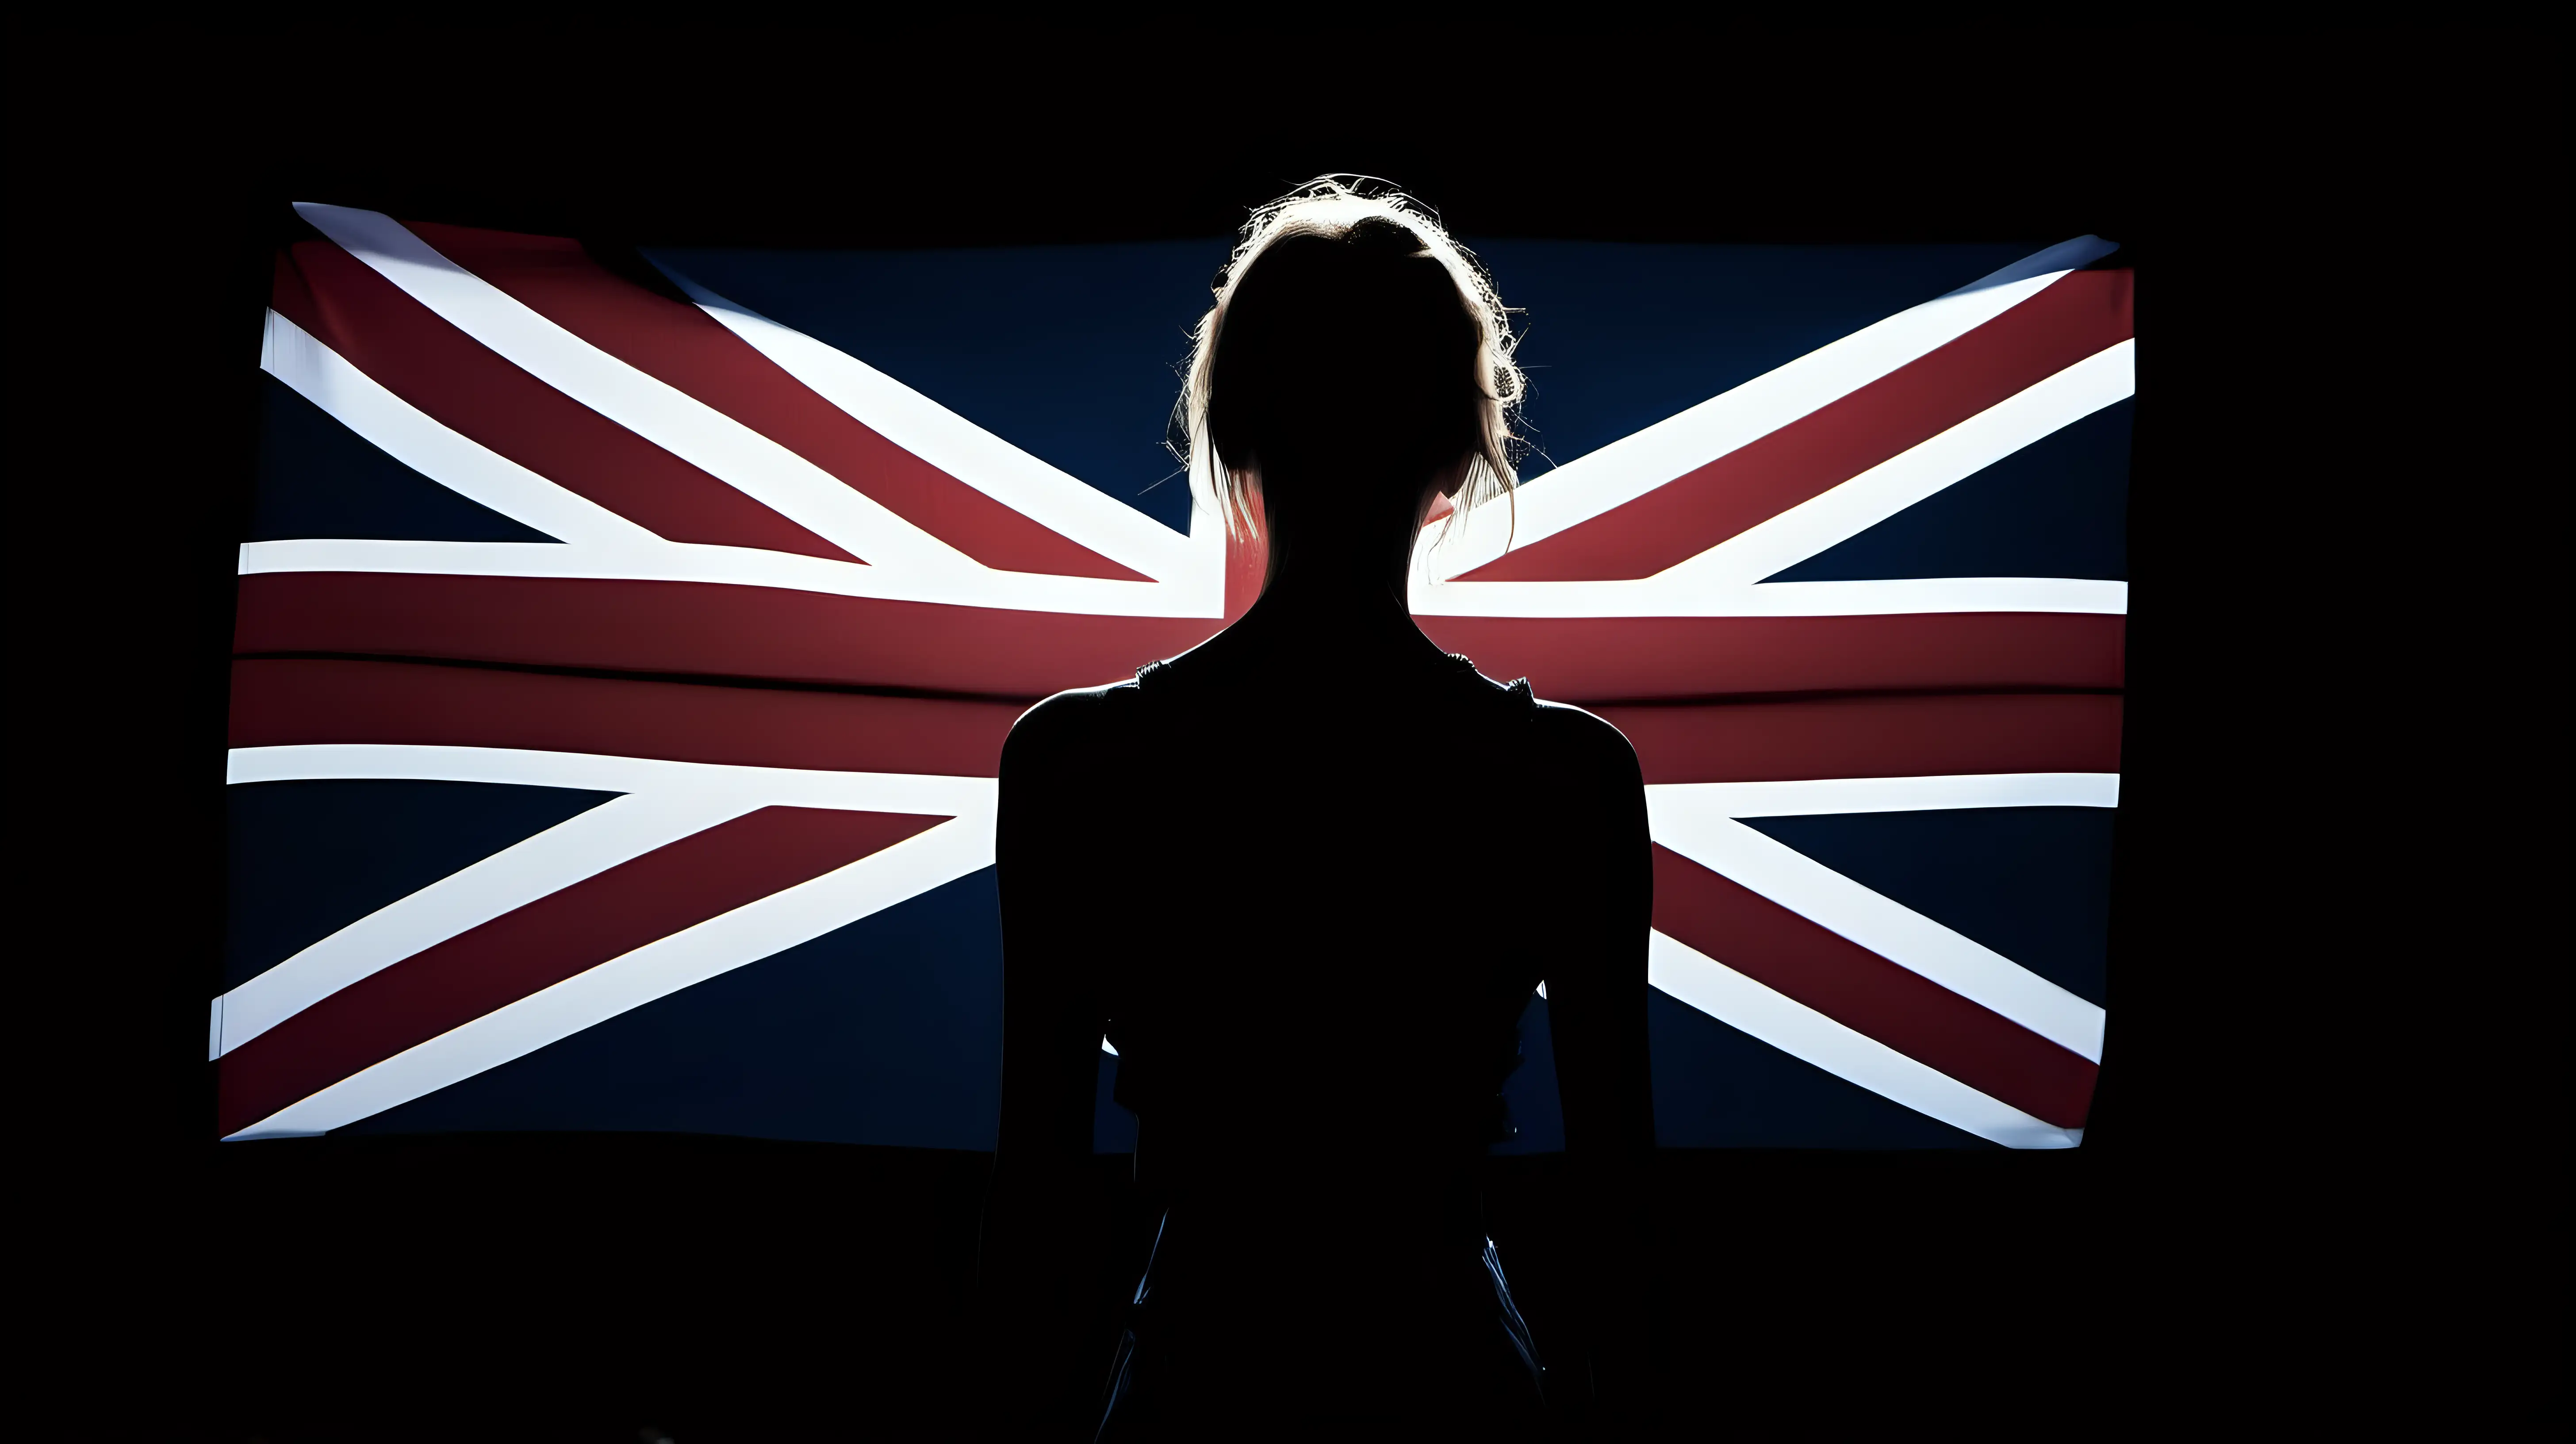 Patriotic Silhouette Person Holding Glowing Union Jack Flag